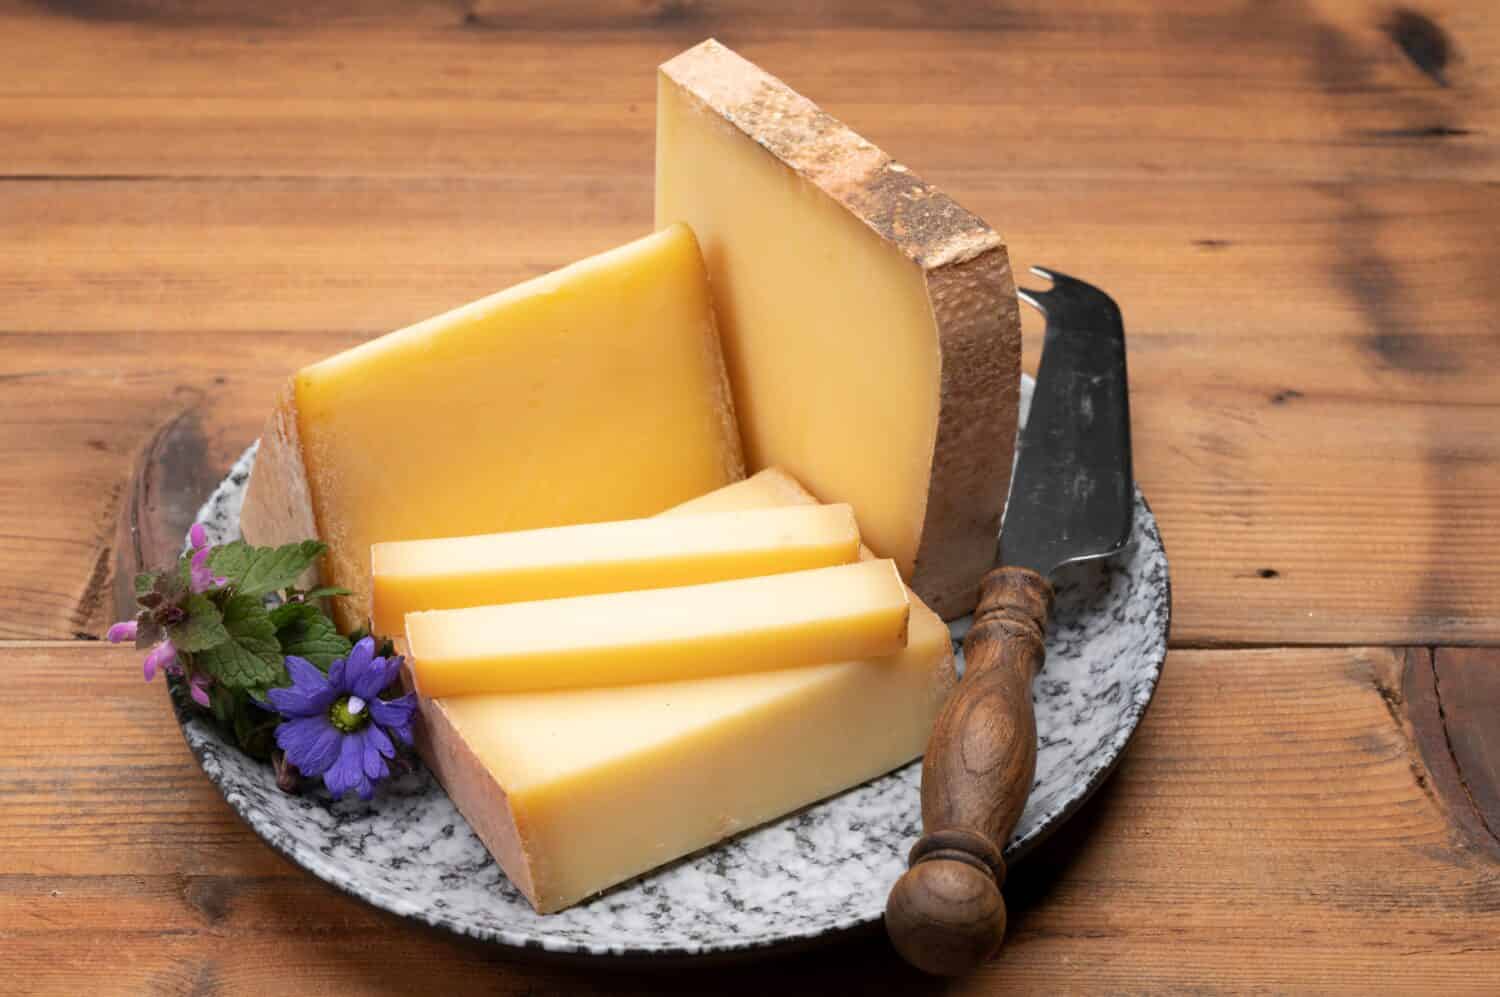 French cheese collection, comte cheese made from unpasteurized cow's milk in Franche-Comte region, France